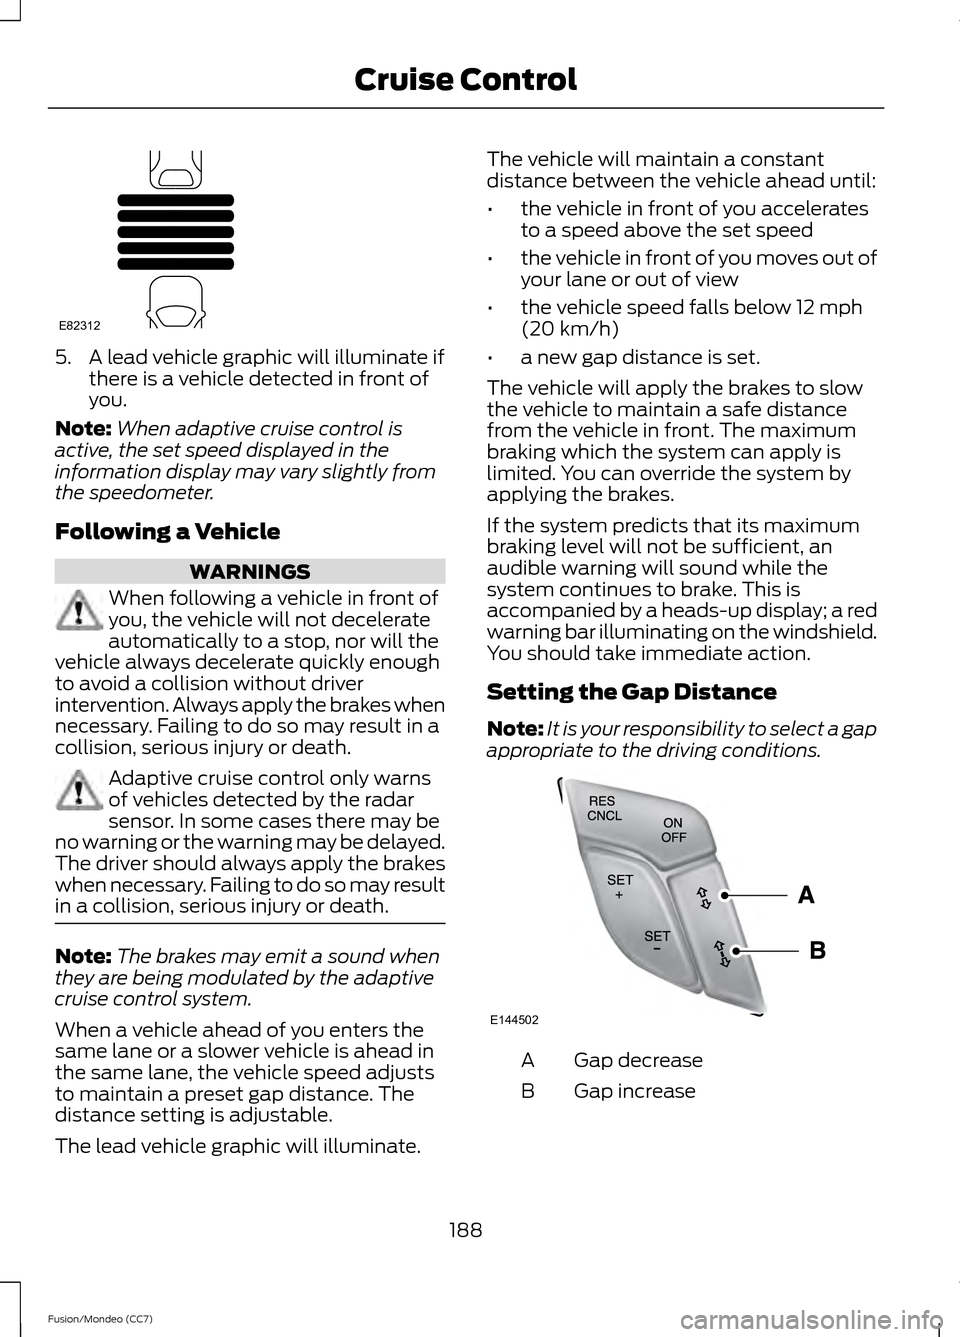 FORD FUSION (AMERICAS) 2013 2.G Owners Manual 5. A lead vehicle graphic will illuminate if
there is a vehicle detected in front of
you.
Note: When adaptive cruise control is
active, the set speed displayed in the
information display may vary slig